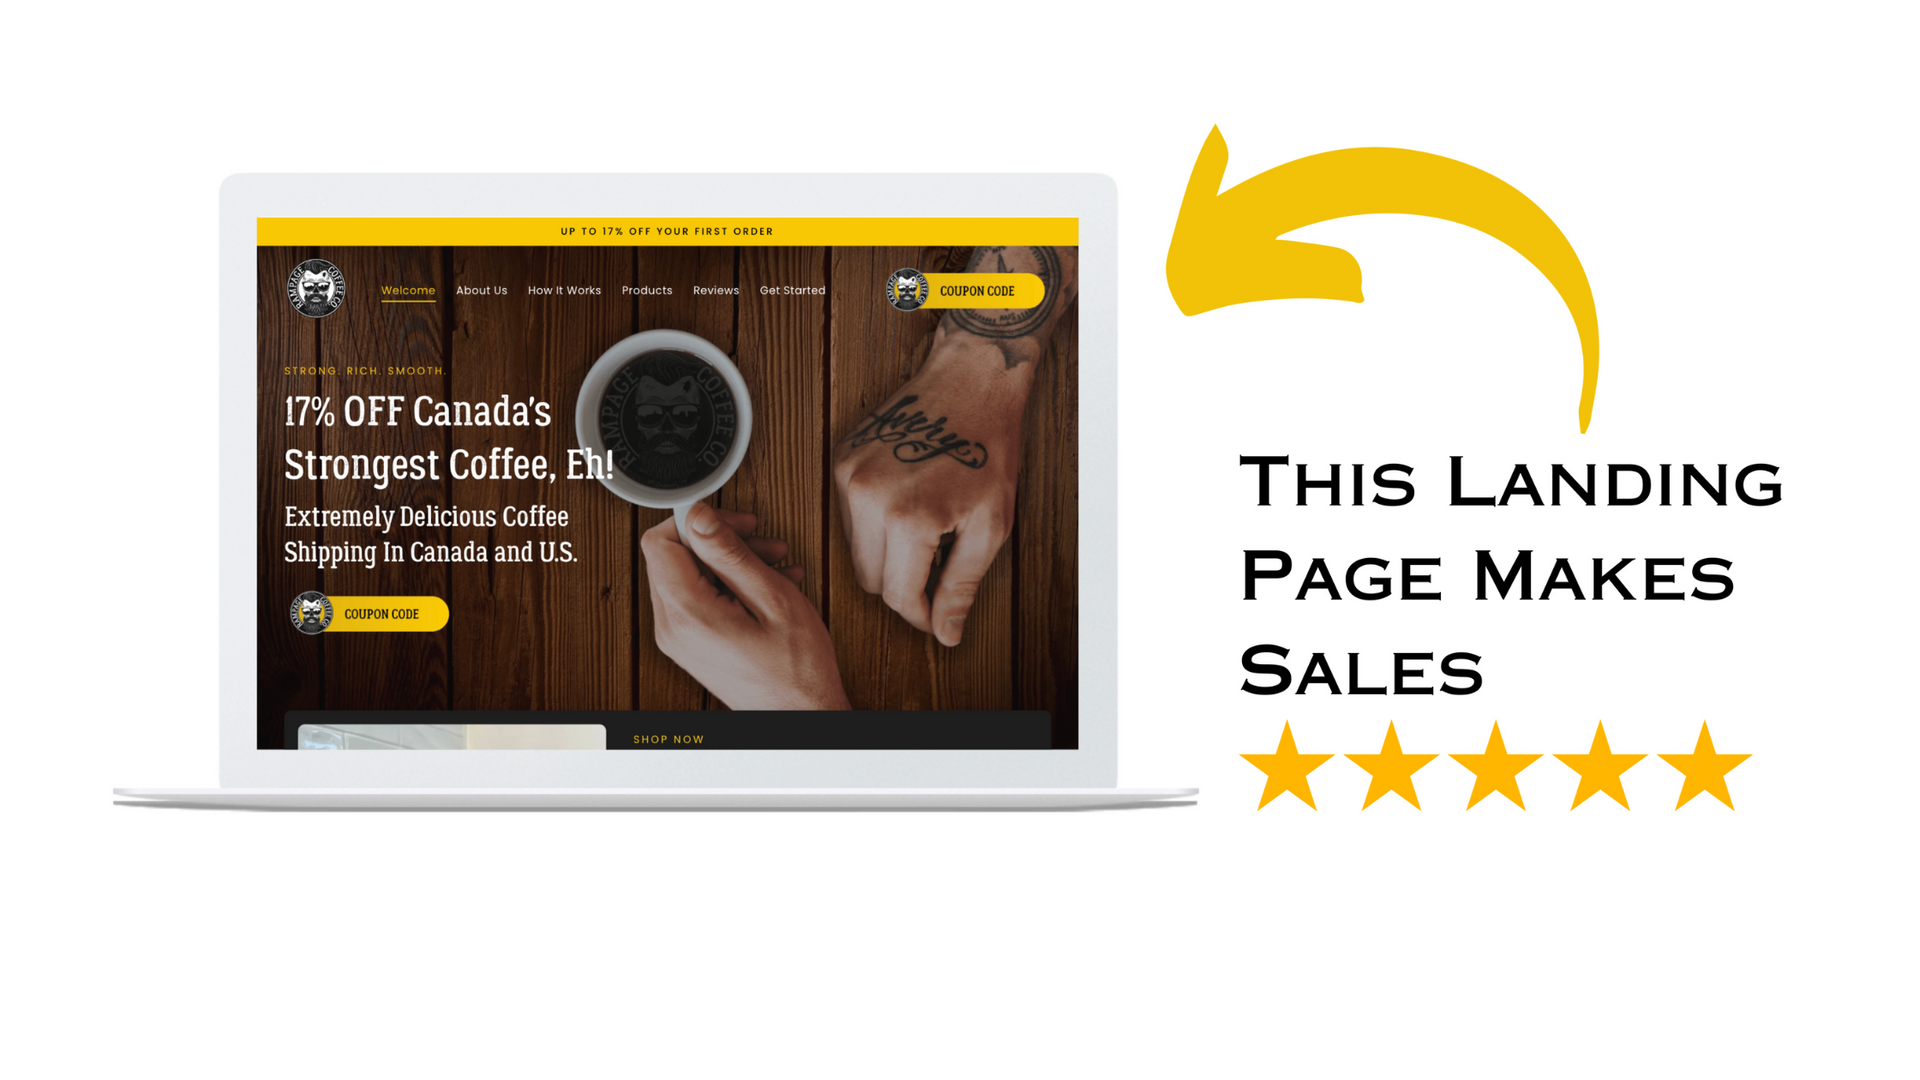 A Landing Page that Makes Sales